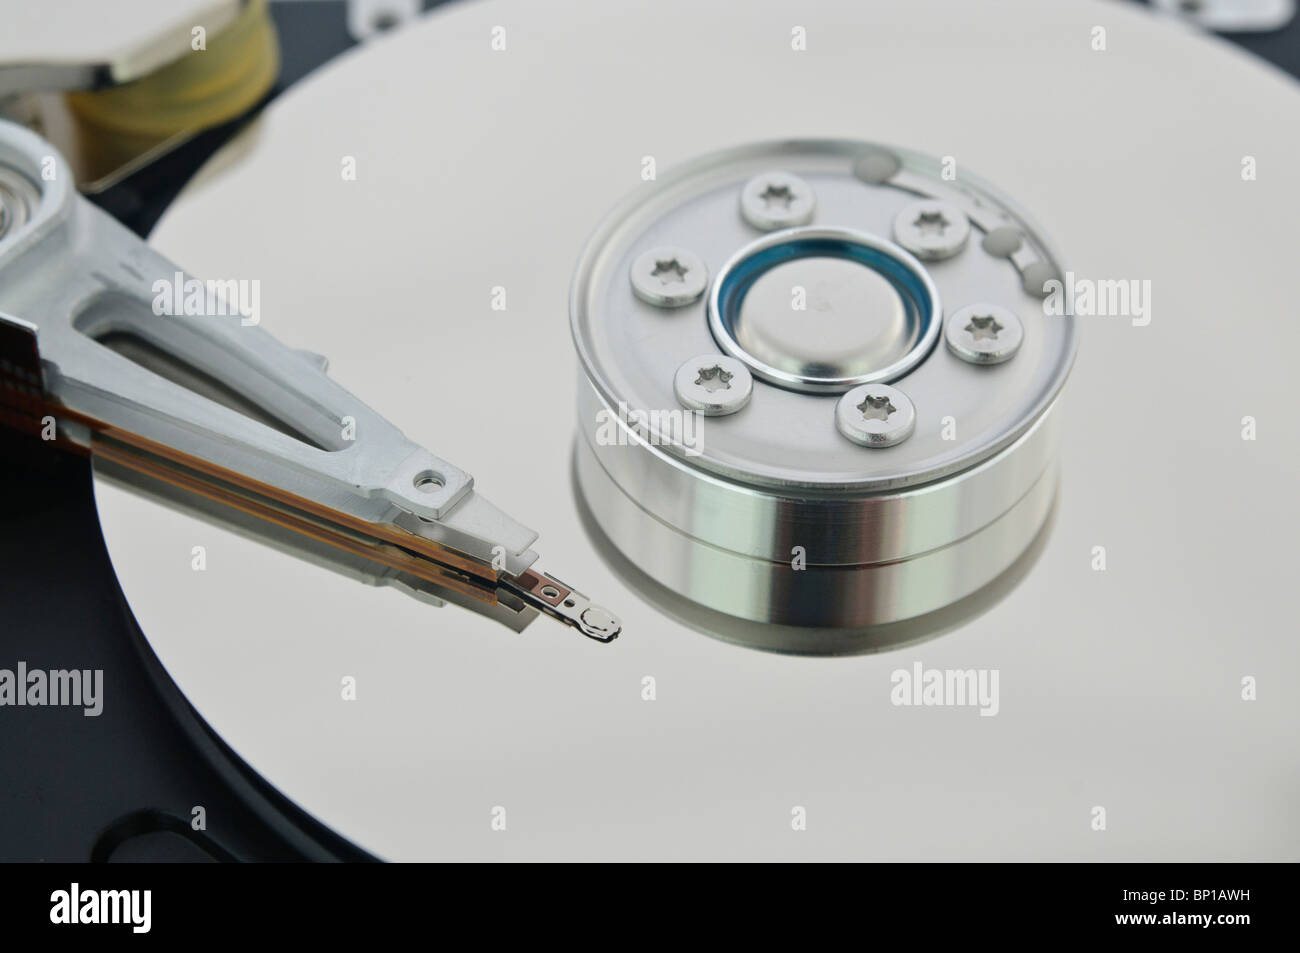 Exposed read-head, arm and platter inside a computer hard disk drive. Stock Photo